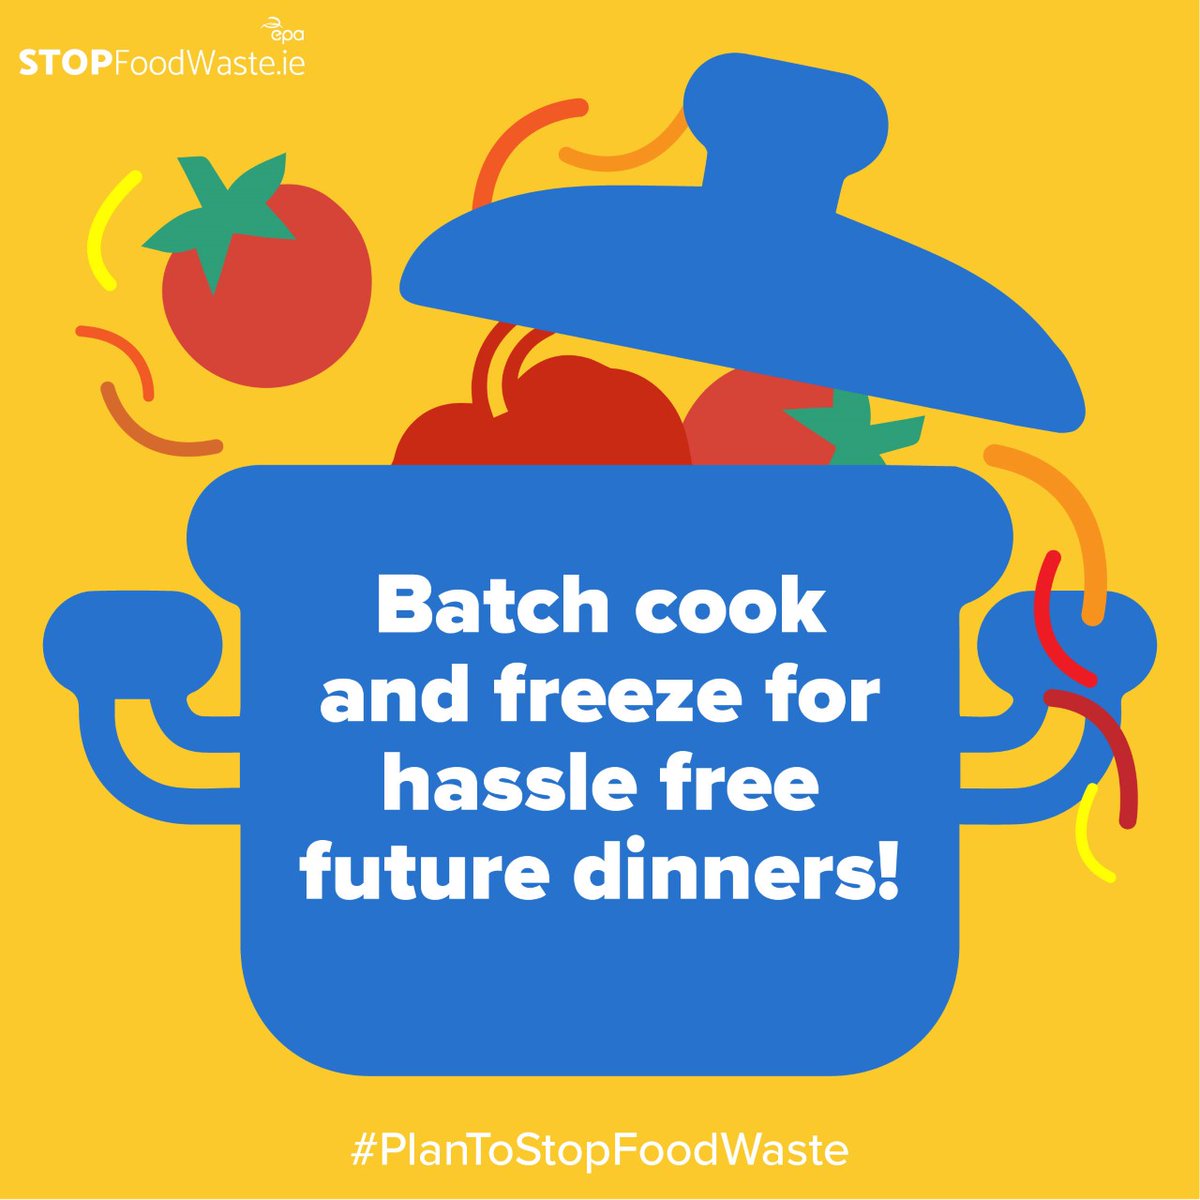 Ever wonder how you can manage to do some really prolonged planning on the old meal front? #PlanToStopFoodWaste by buying large packet ingredients found in freezer-friendly recipes